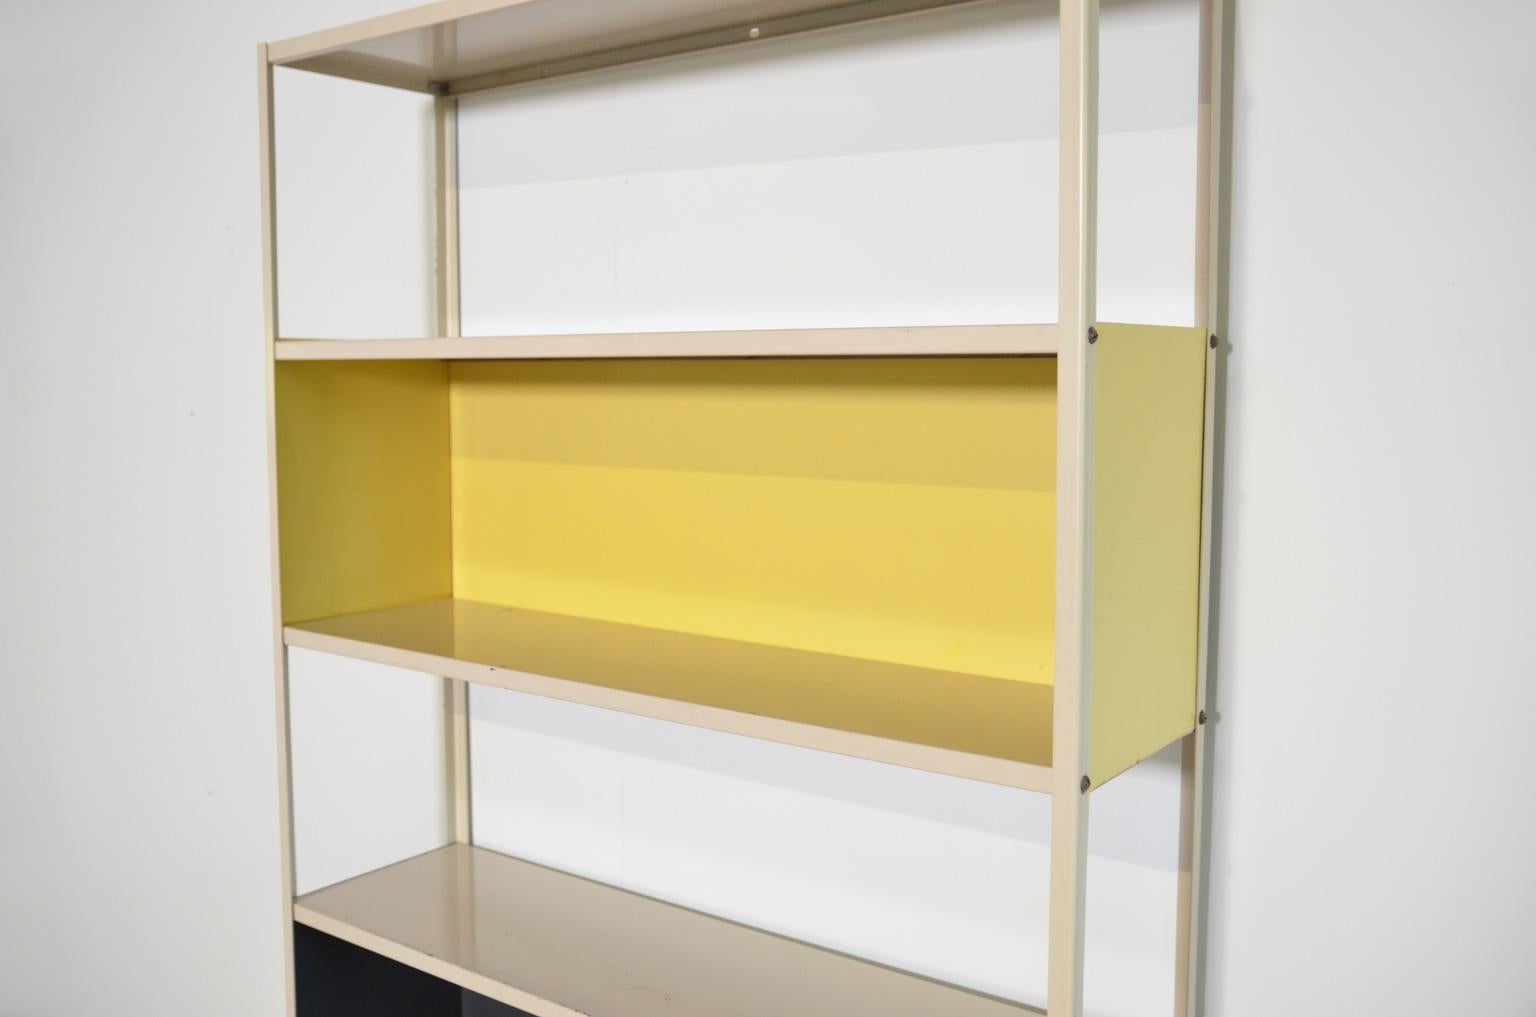 Lacquered Asmeta Wall System in yellow and grey by Dutch designer Friso Kramer